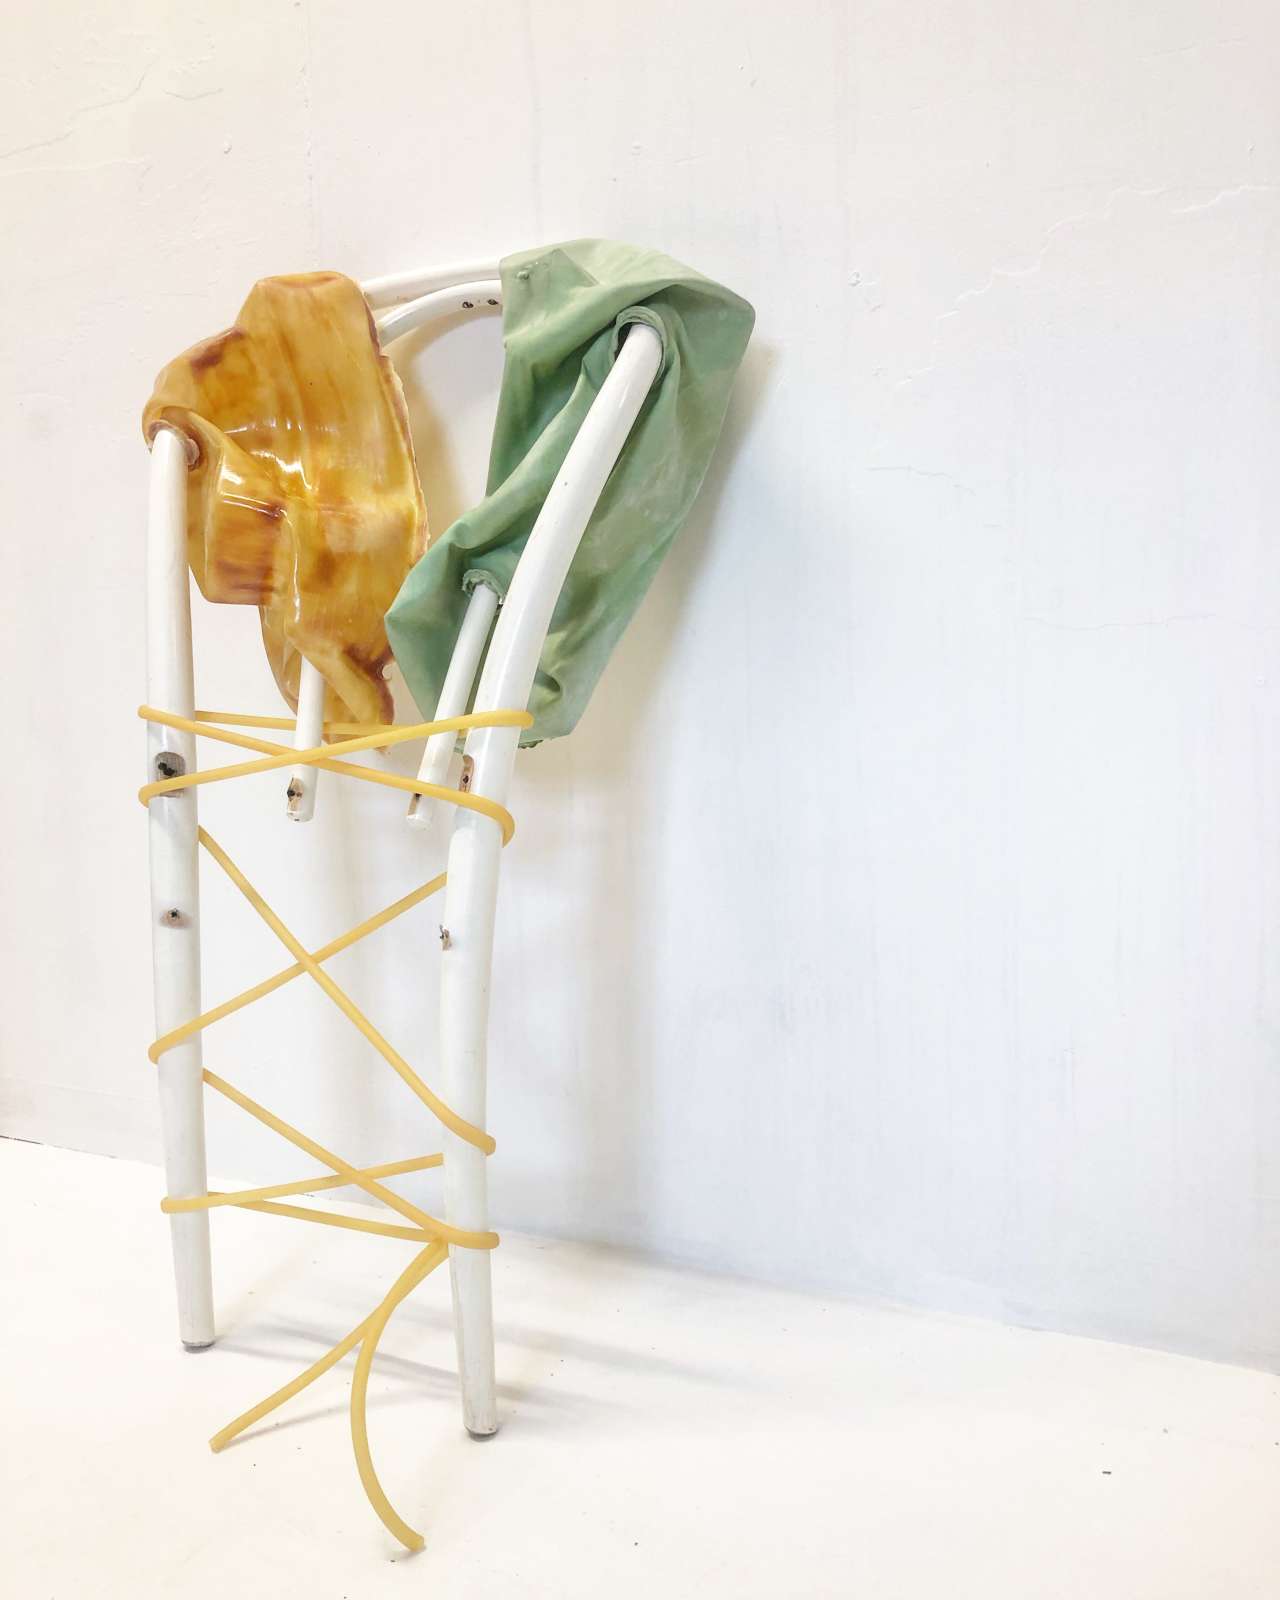 Andrea V Wright, Precarious Conditions of Uncertainty II, 2020. Deconstructede Chair, Latex, Pigment